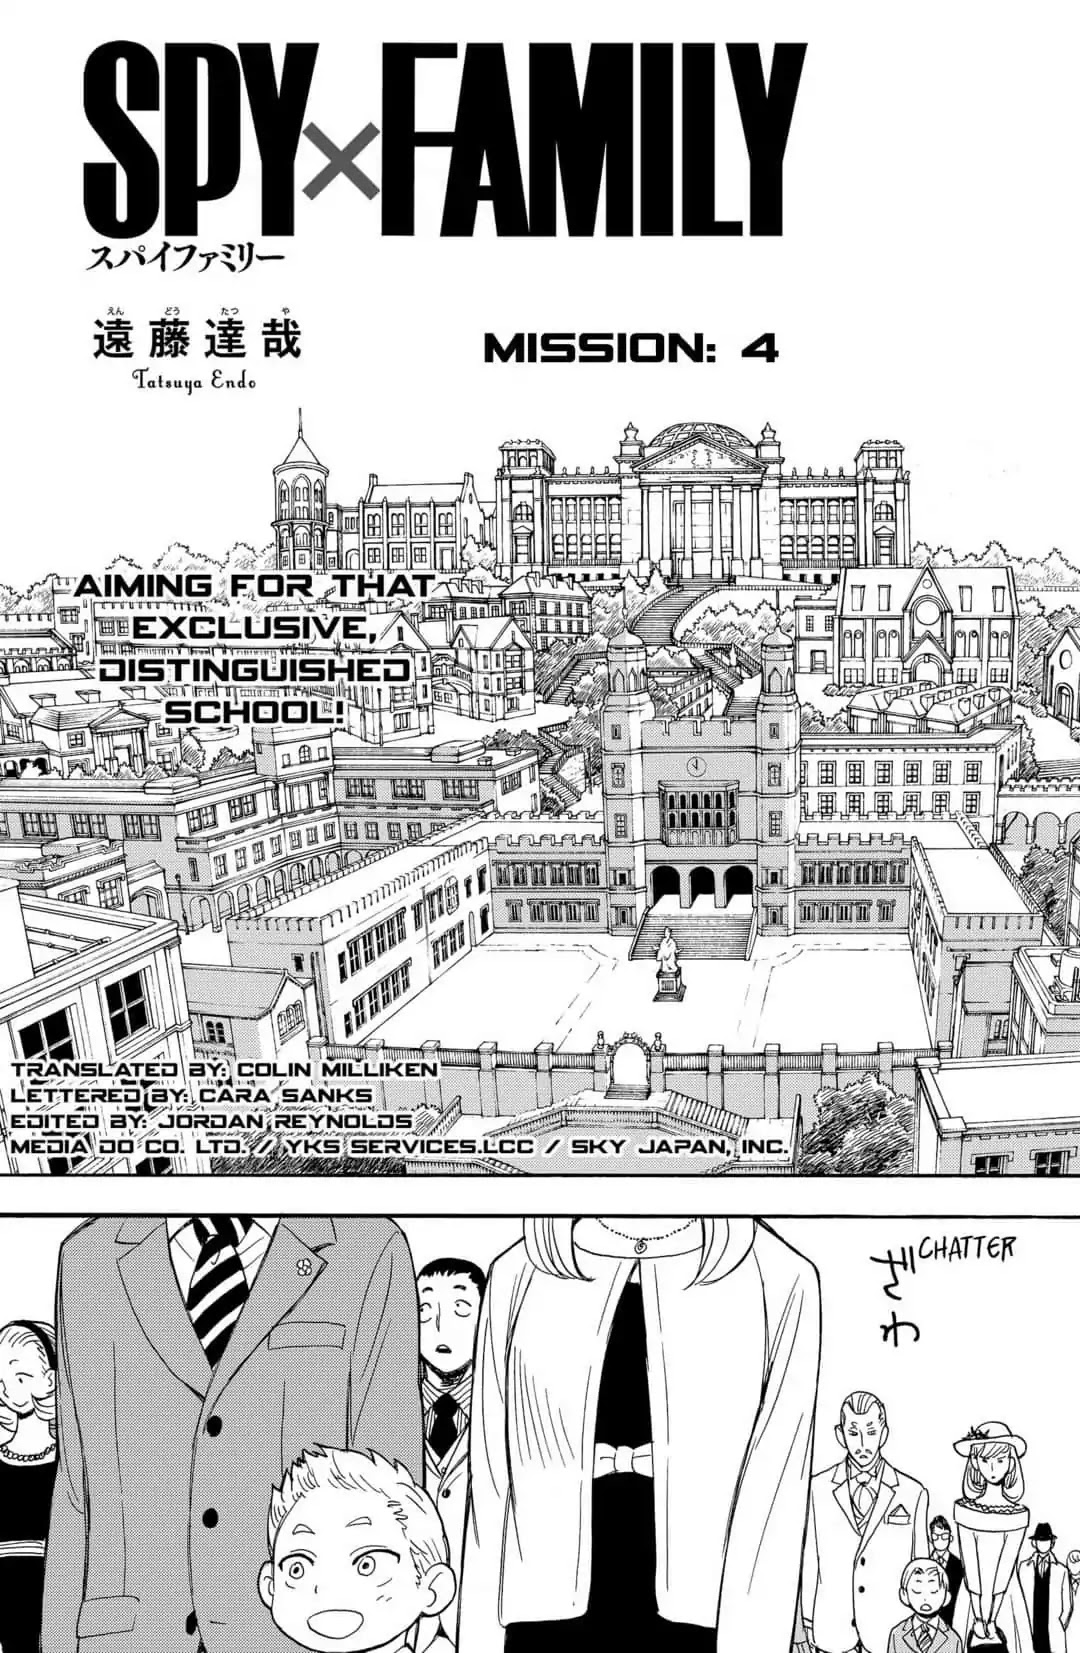 Spy x Family, spy x family anime announcement, spy x family wiki, read spy x family, read spy x family manga, spy x family manga, spy x family manga online, read spy x family online, spy x family characters, spy x family chapters and volumes, how many volumes of spy x family are there, spy x family viz, spy x family anime news, spy x family amazon, spy x family novel, is spy x family good, the spy x family, spy x family anime studio, spy x family anime adaptation, spy x family author, spy x family age appropriate, spy x family art, spy x family anime release schedule, spy x family box set, spy x family books, spy x family book 4, spy x family book 2, spy x family book 1, spy x family books a million, spy x family book 5, spy x family book 6, spy x family bundle, spy x family booktopia, spy x family cover, spy x family dog, spy x family damien, spy x family do they find out, spy x family discussion, spy x family daybreak, spy x family description, spy x family domain, spy x family digital, spy x family dj, spy x family donovan desmond, spy x family ebook, spy x family episodes